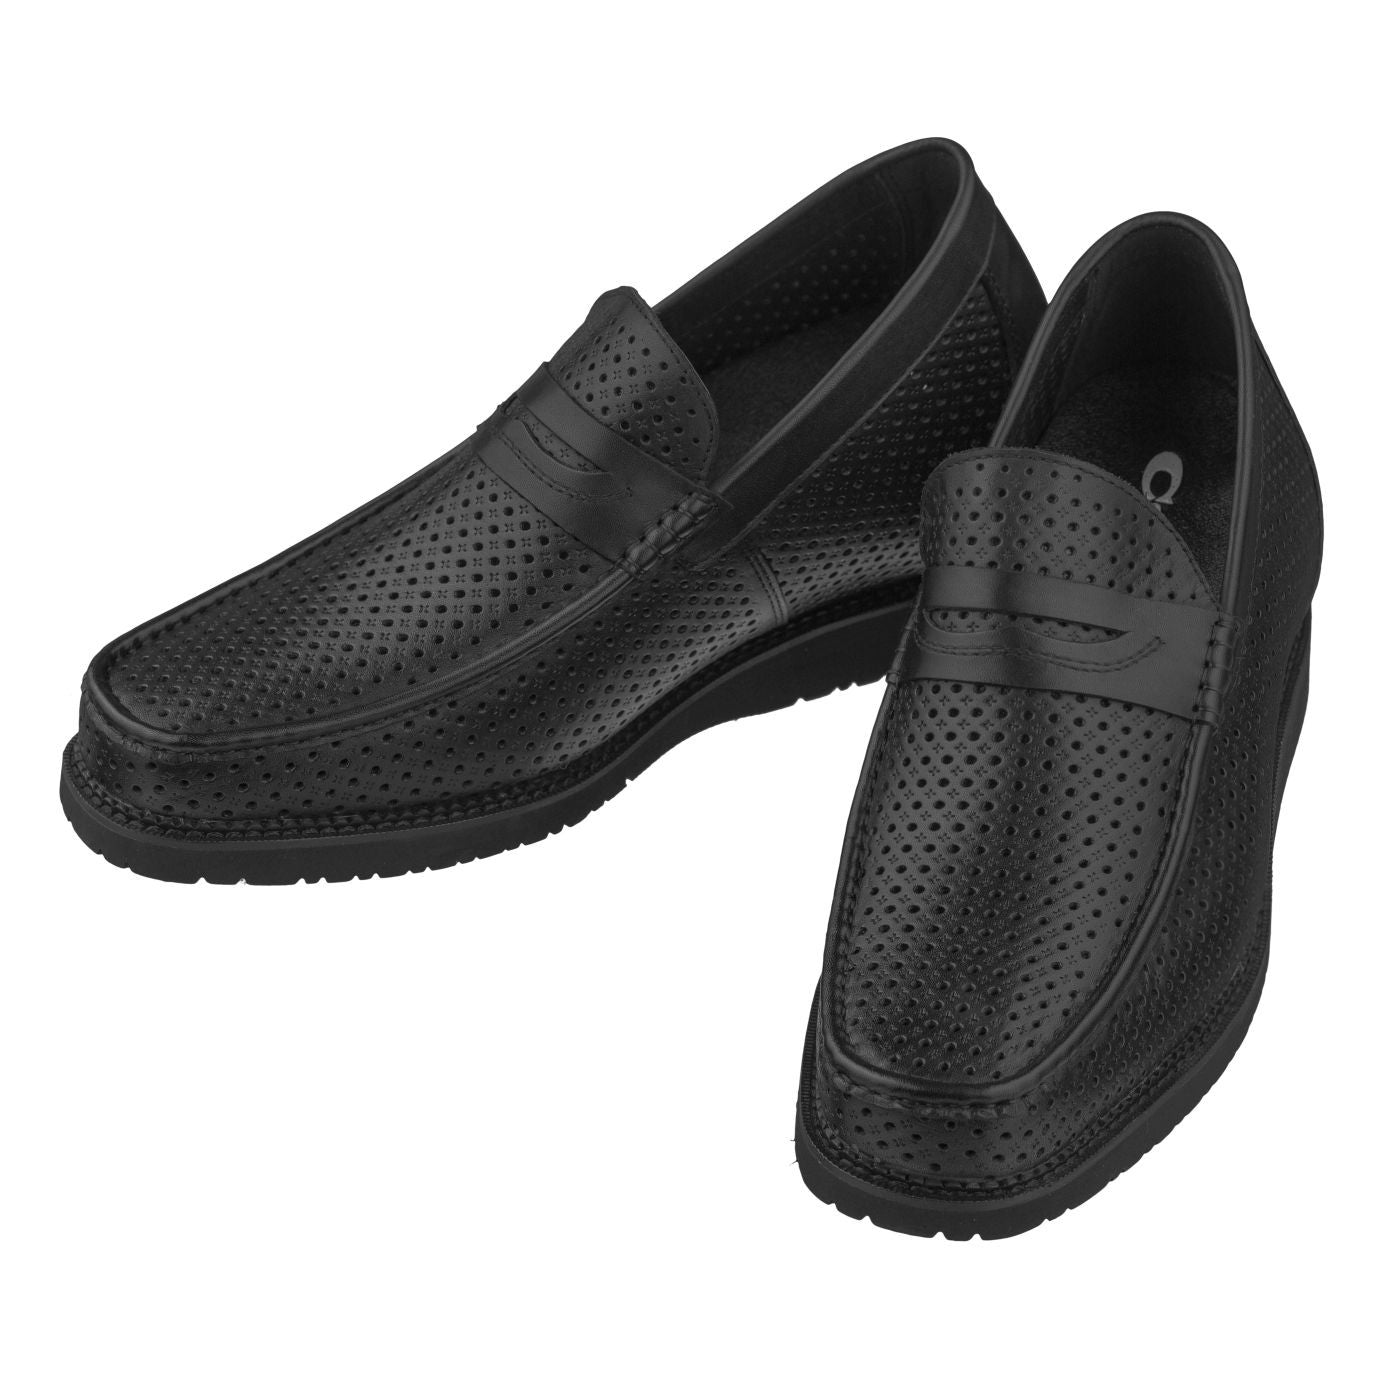 Elevator shoes height increase CALTO - T1431 - 3.2 Inches Taller (Black) - Lightweight